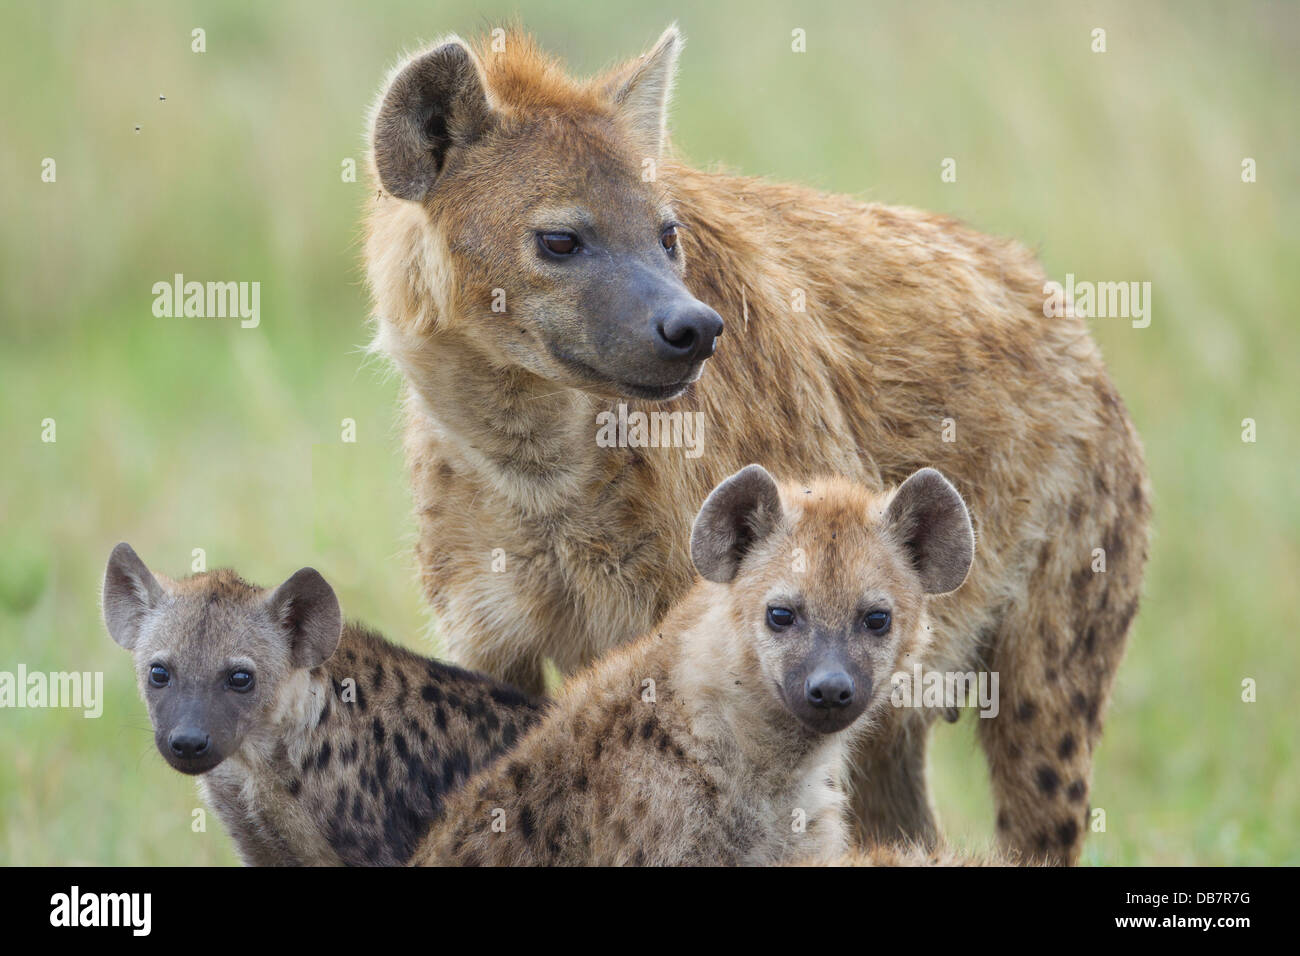 Spotted Hyena or Laughing Hyena (Crocuta crocuta) adult with cubs Stock Photo